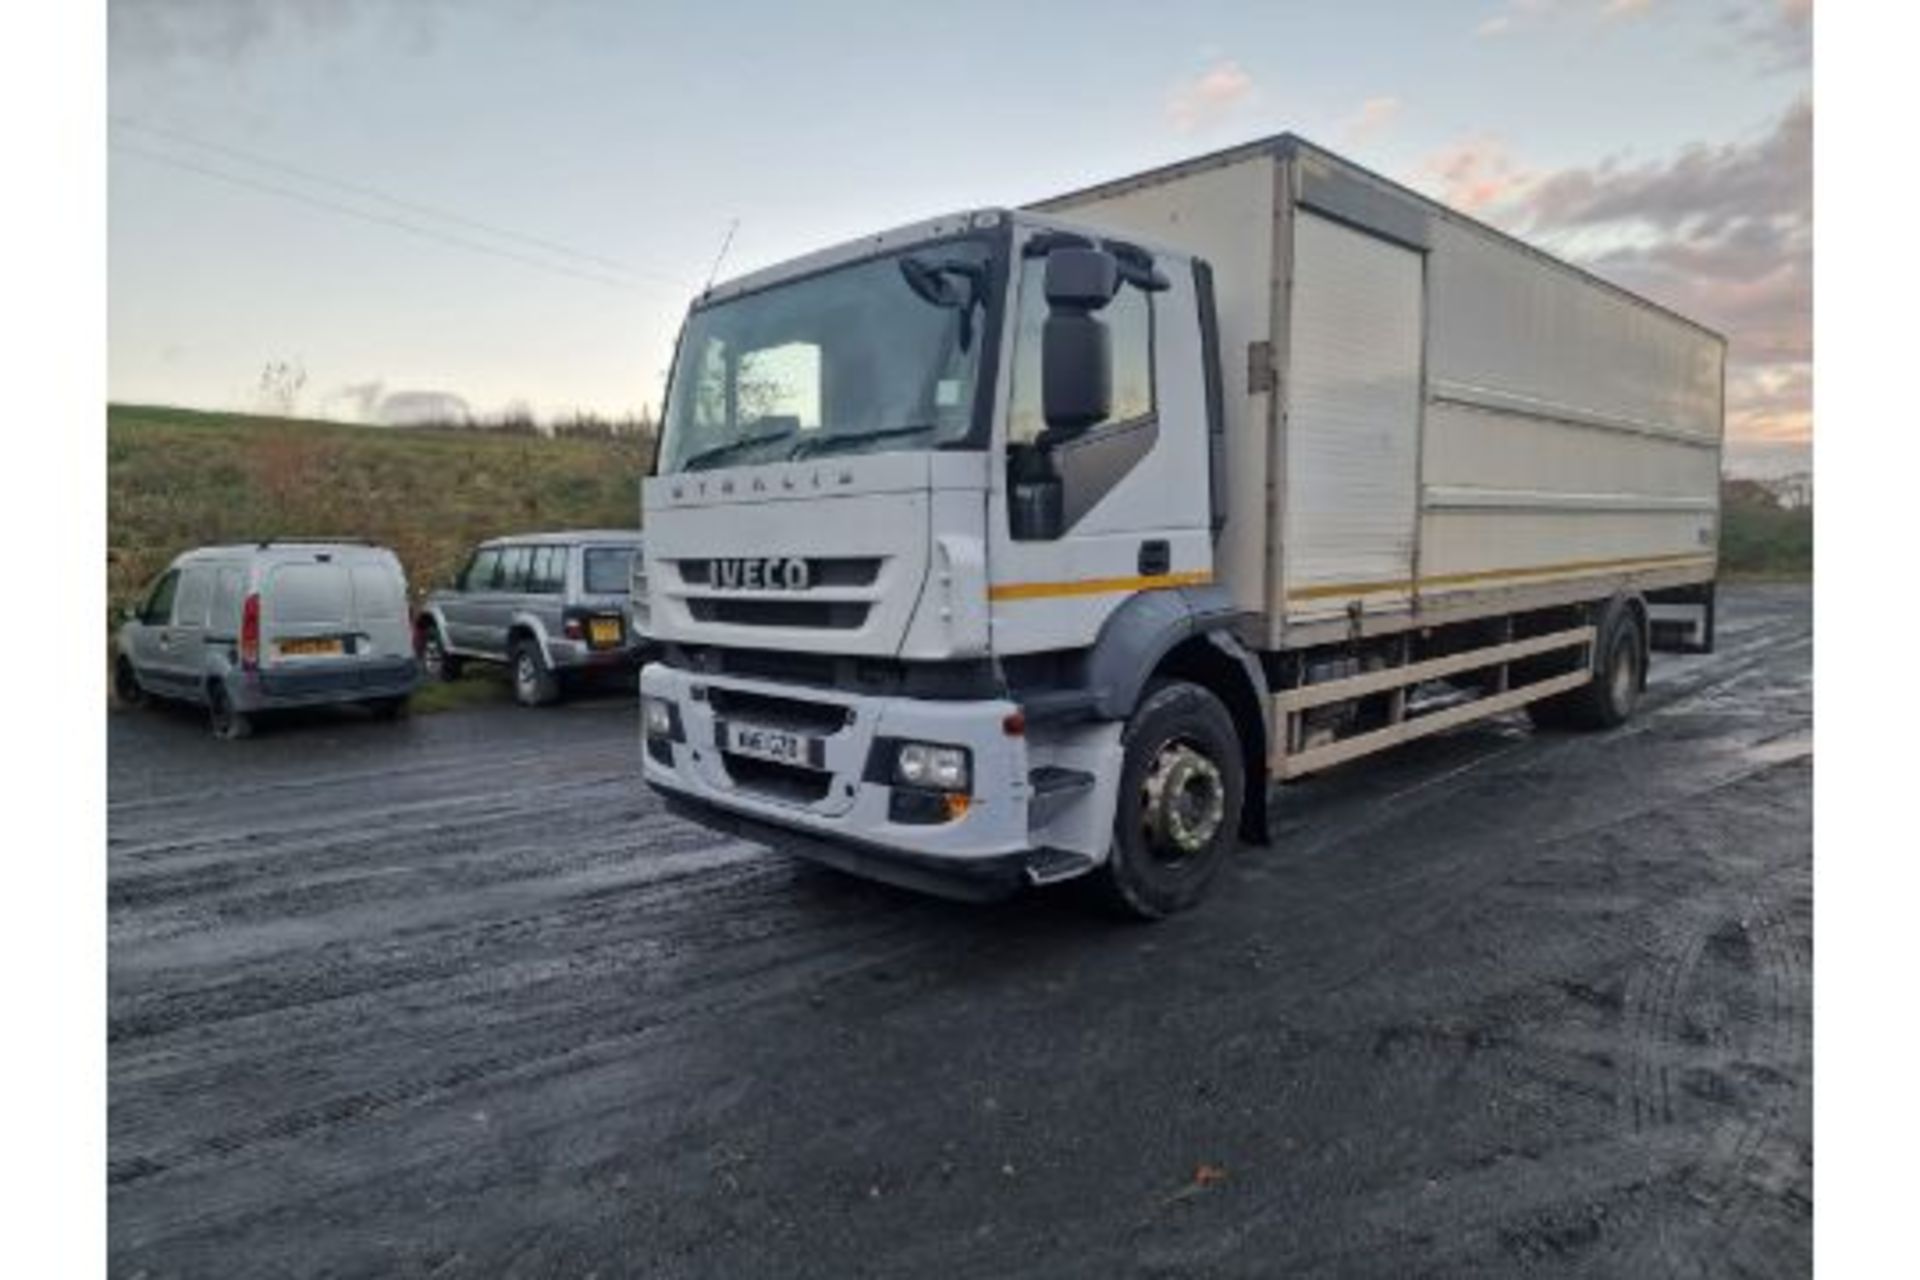 11/61 IVECO STRALIS - 7790cc 2dr Lorry (White) - Image 2 of 9